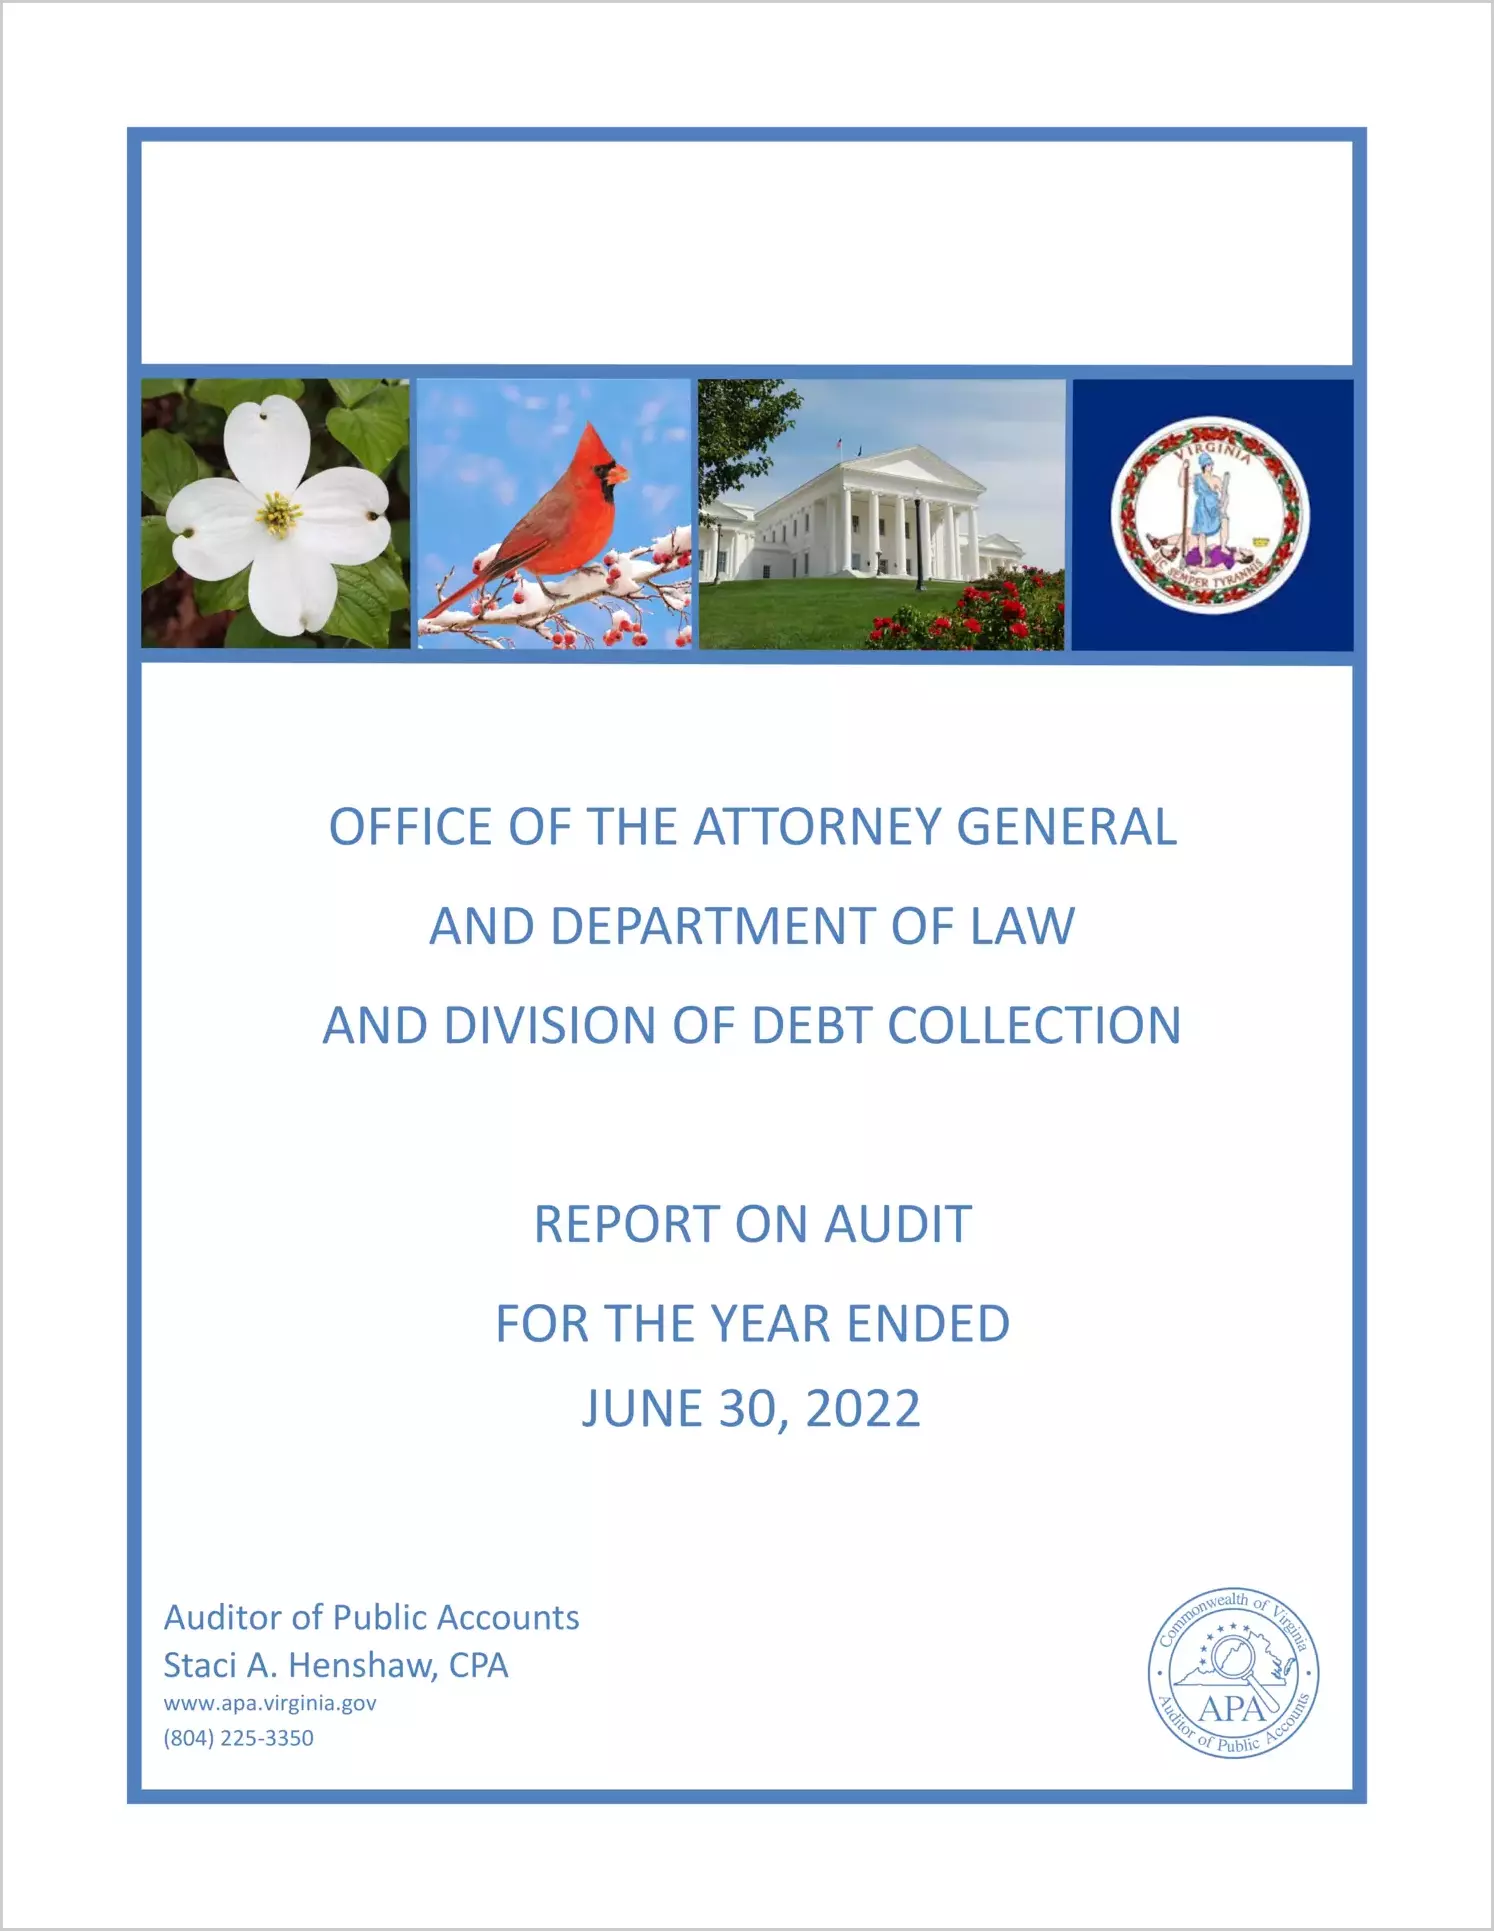 Office of the Attorney General and Department of Law and Division of Debt Collection for the year ended June 30, 2022